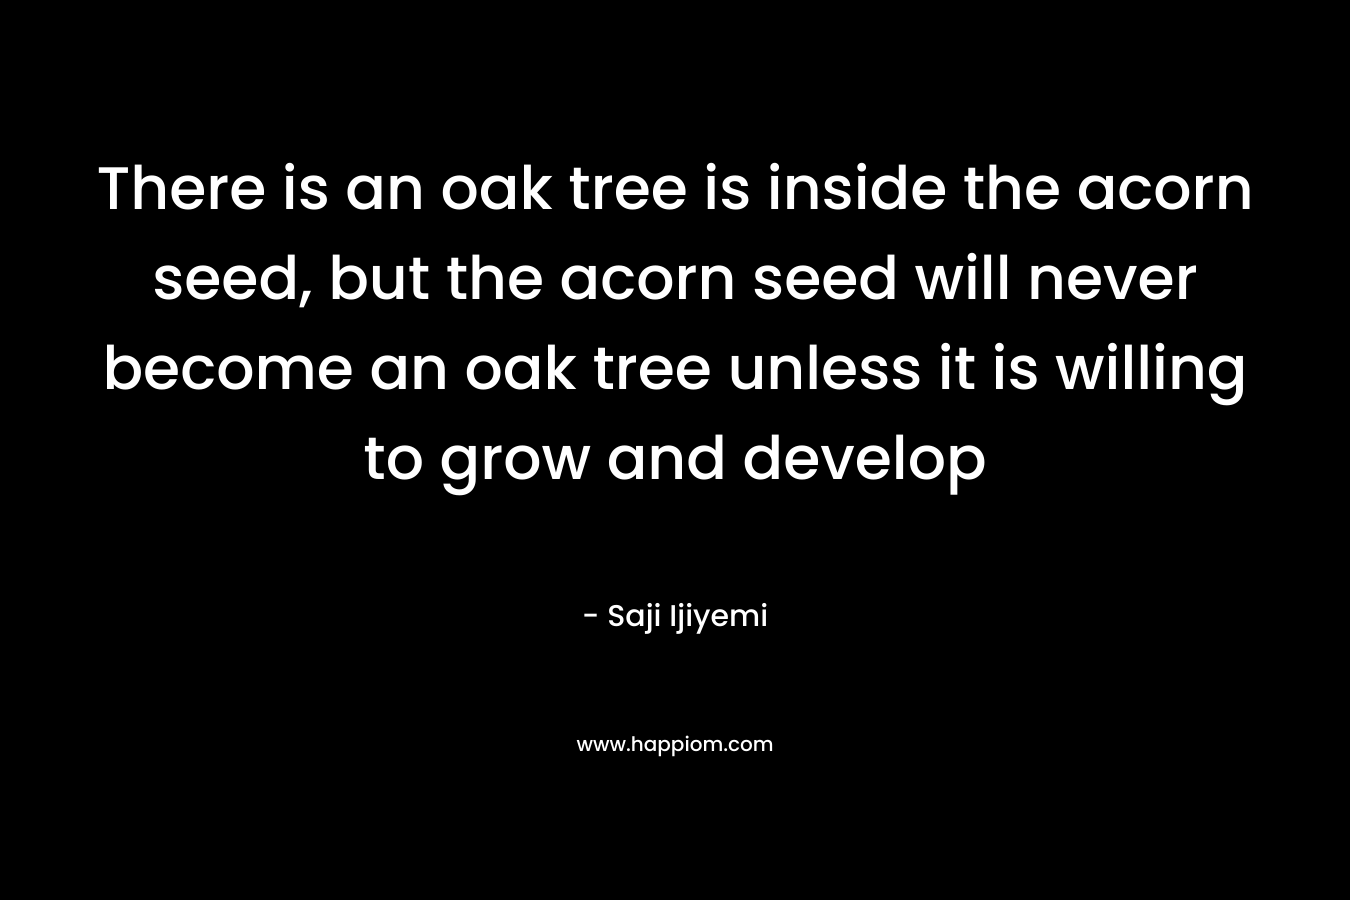 There is an oak tree is inside the acorn seed, but the acorn seed will never become an oak tree unless it is willing to grow and develop